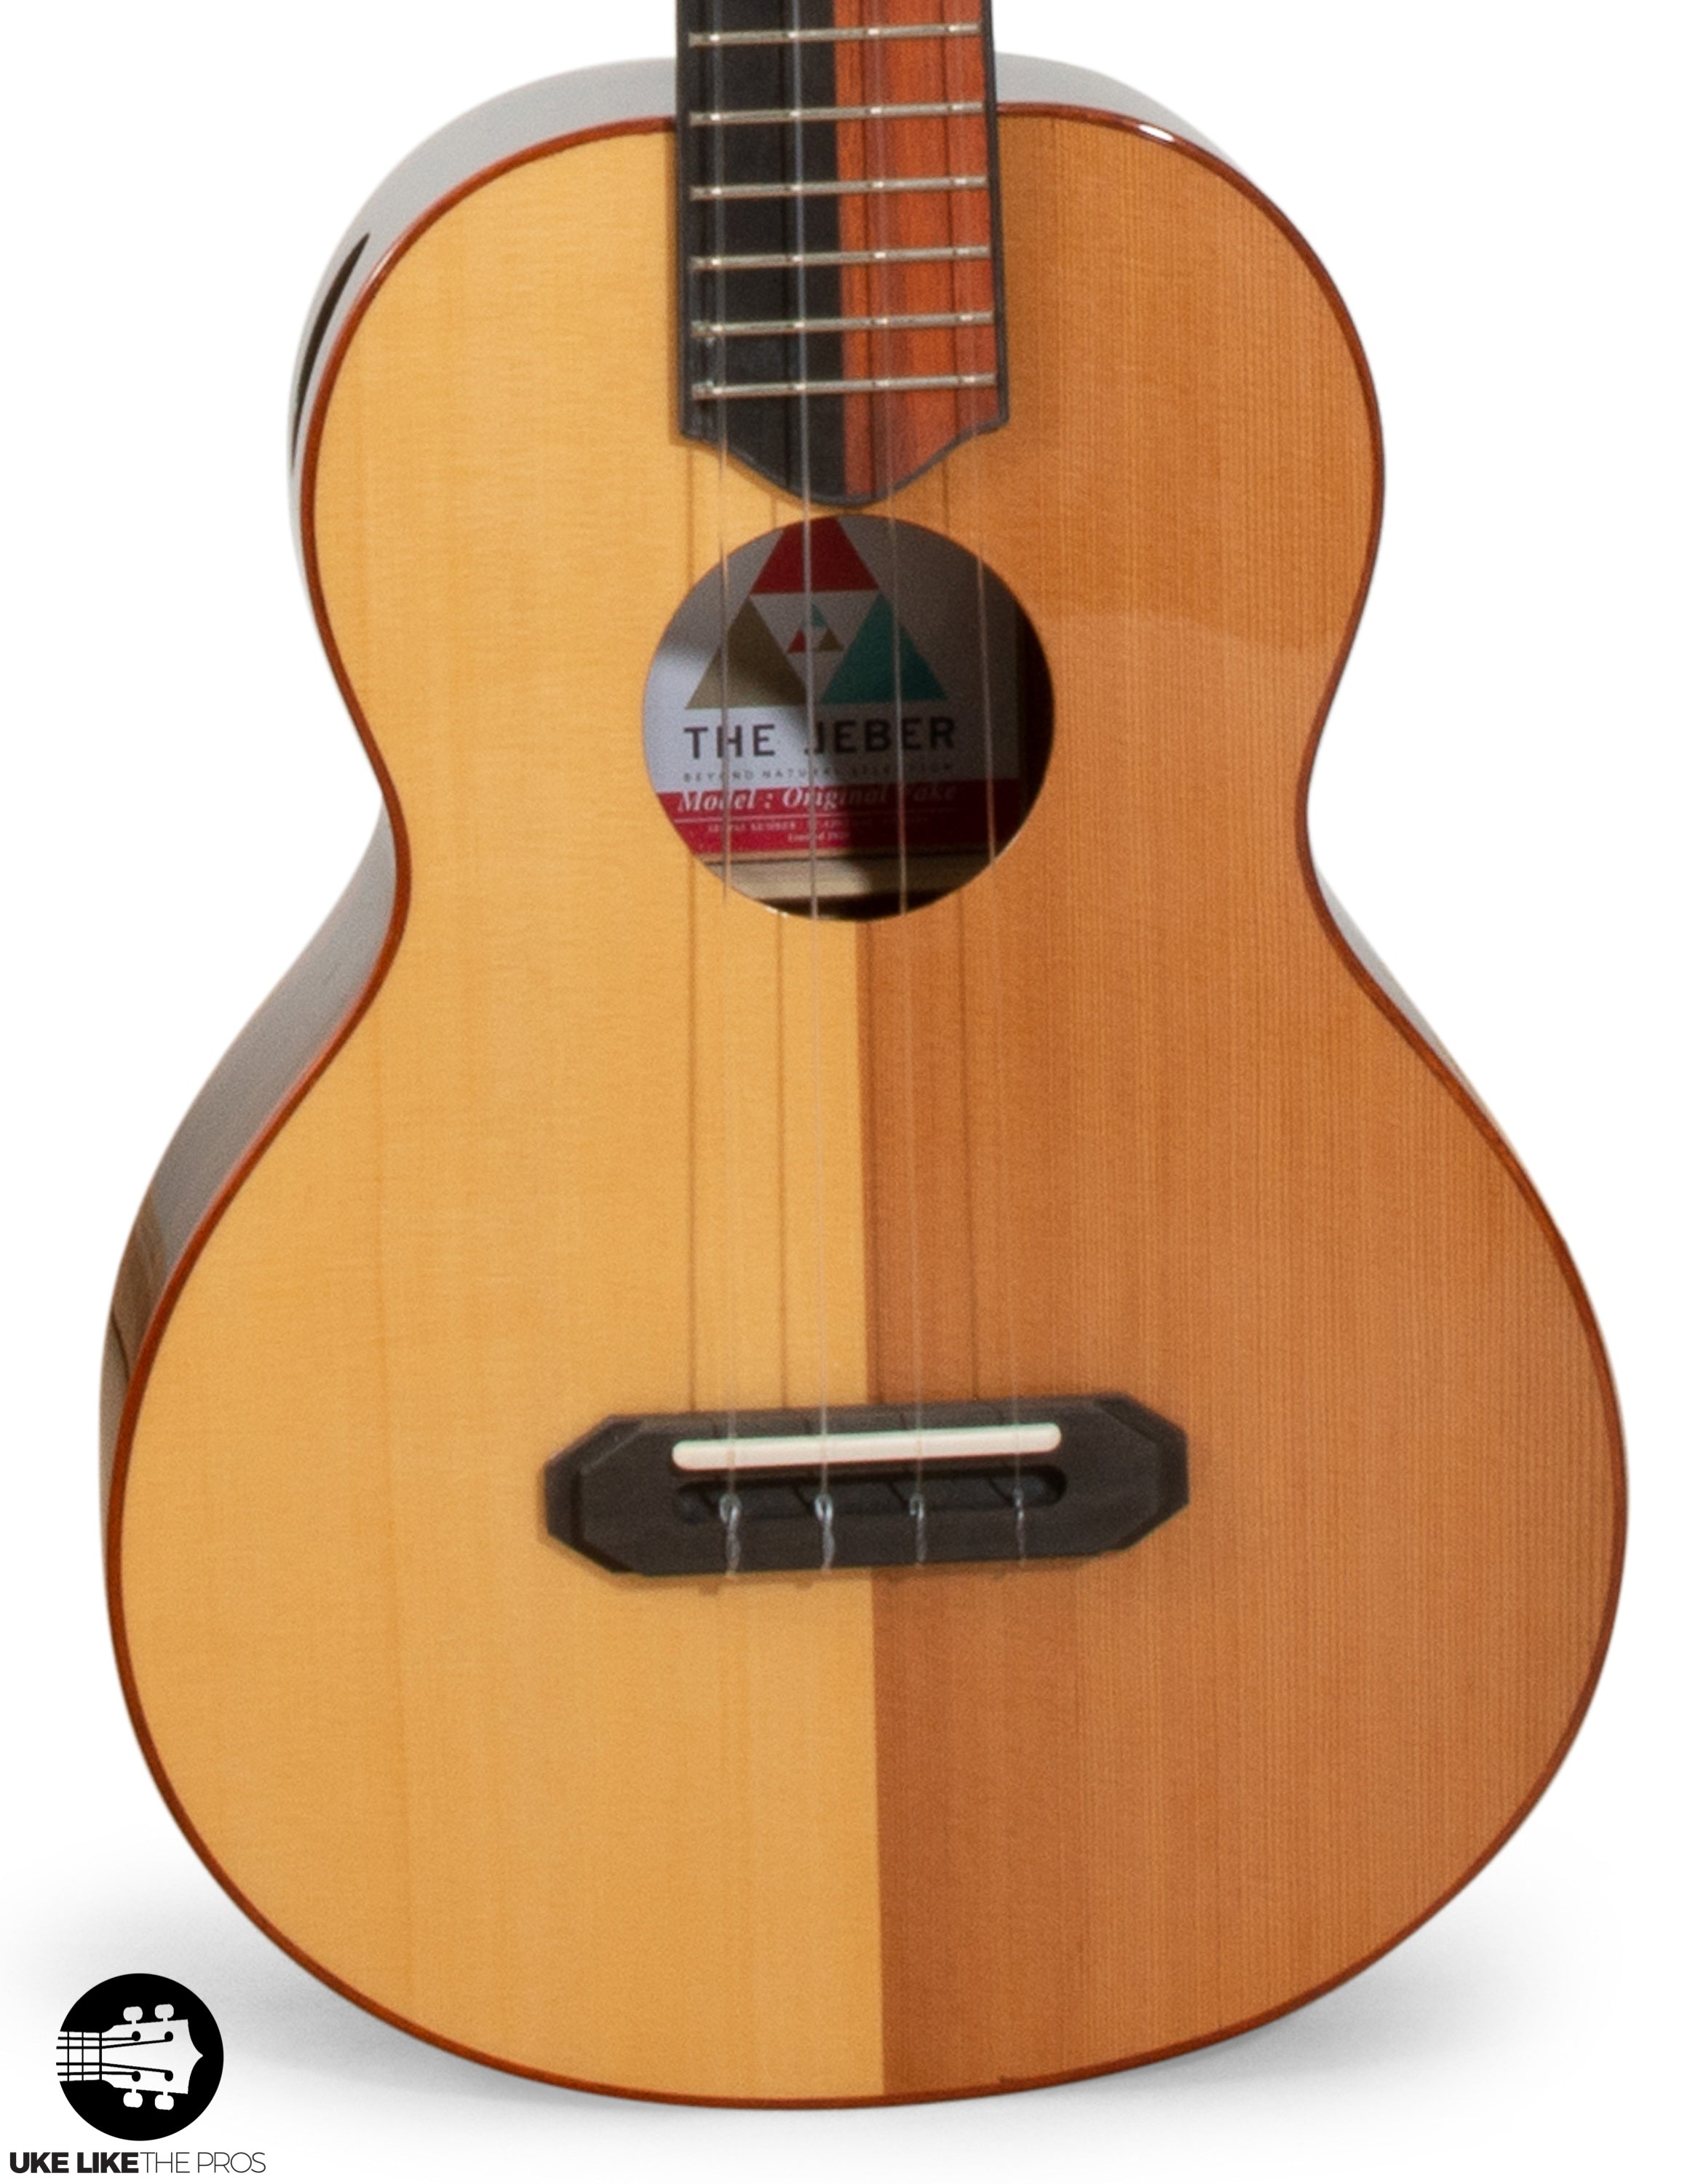 Rebel New Particle Tenor Ukulele Solid Cedar/Spruce "Parzival" ONLY 10 MADE